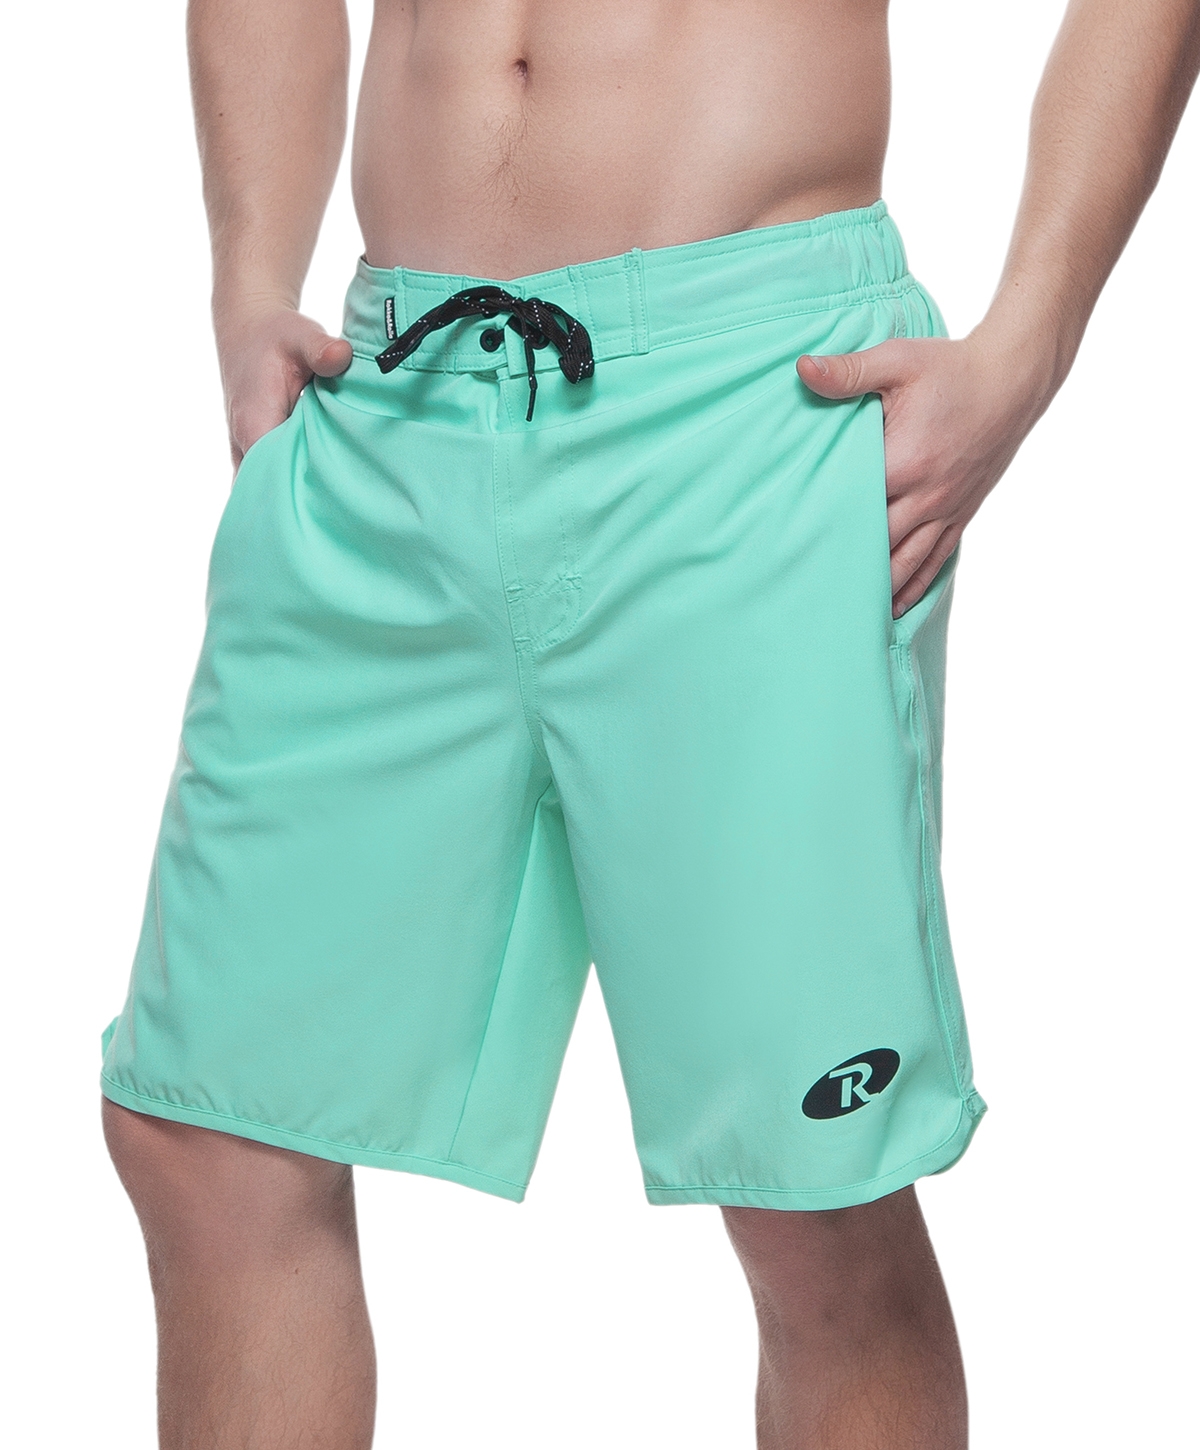 Men's 9" Stretch Mesh Lined Swim Trunks, up to Size 2XL - Teal